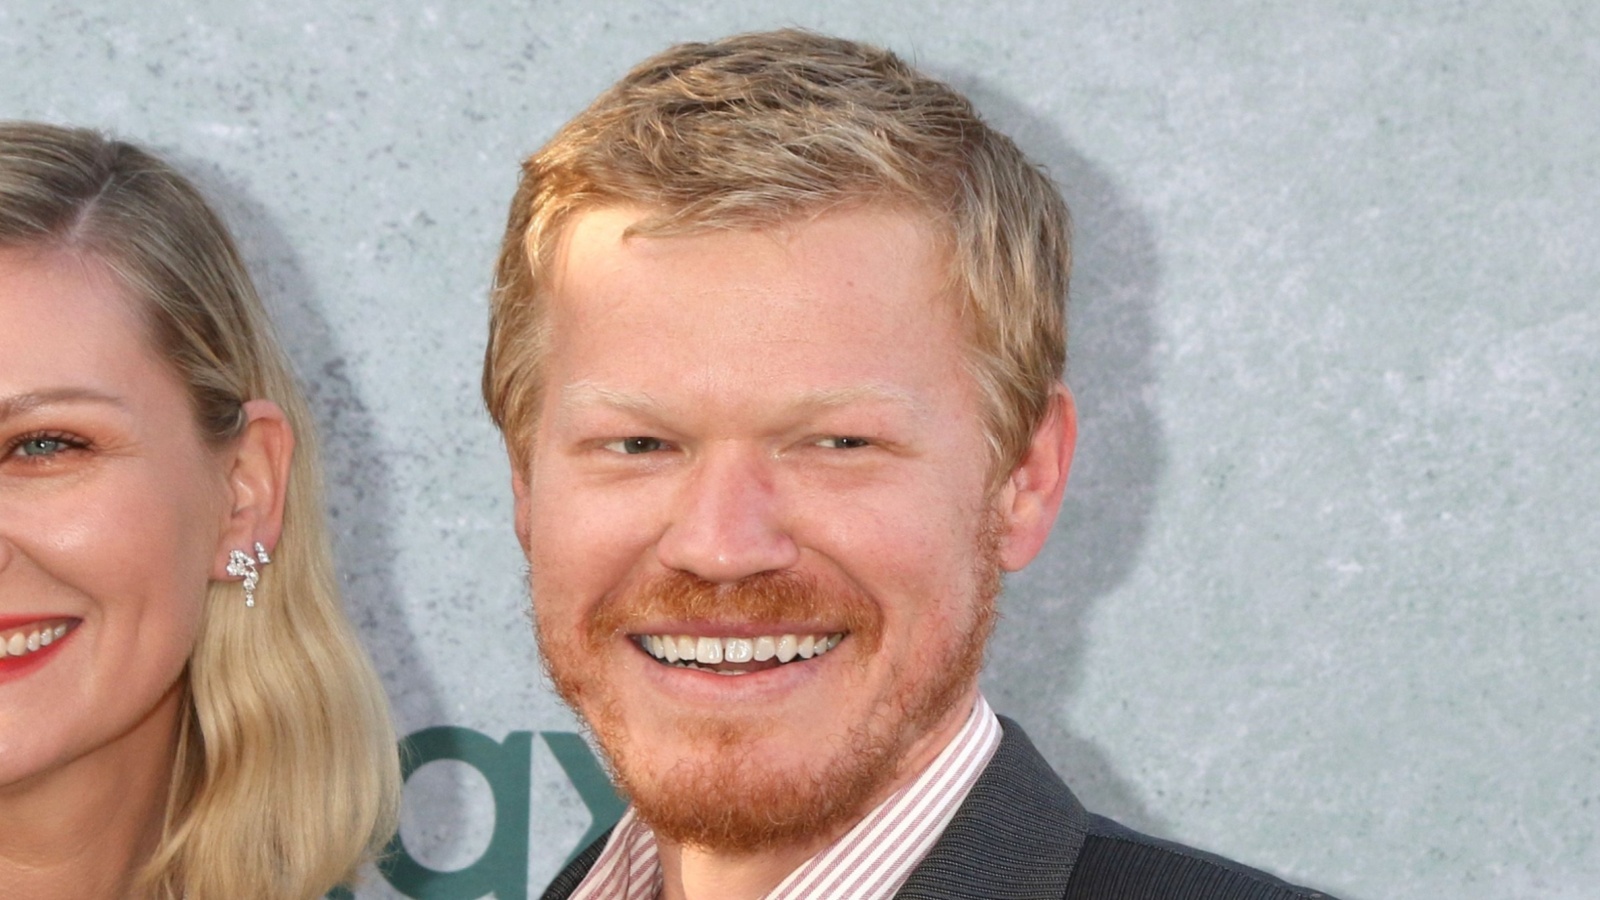 Actor Jesse Plemons Lost Weight by Intermittent Fasting  Here’s What It Is and How You Can Start [Video]